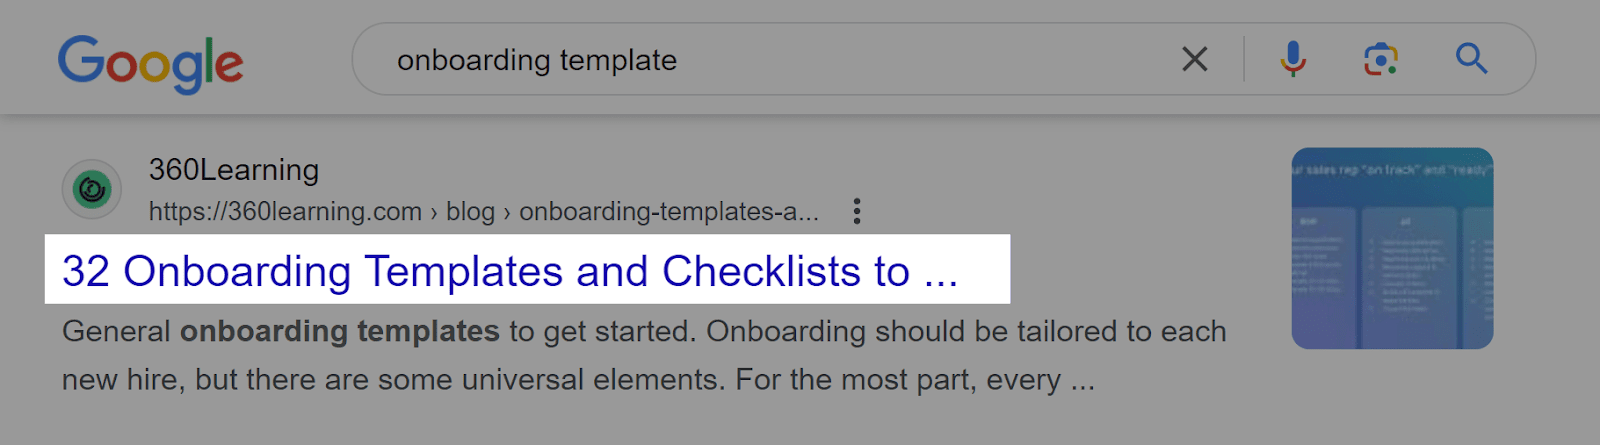 Example of truncated headline of 'onboarding template' Google search.